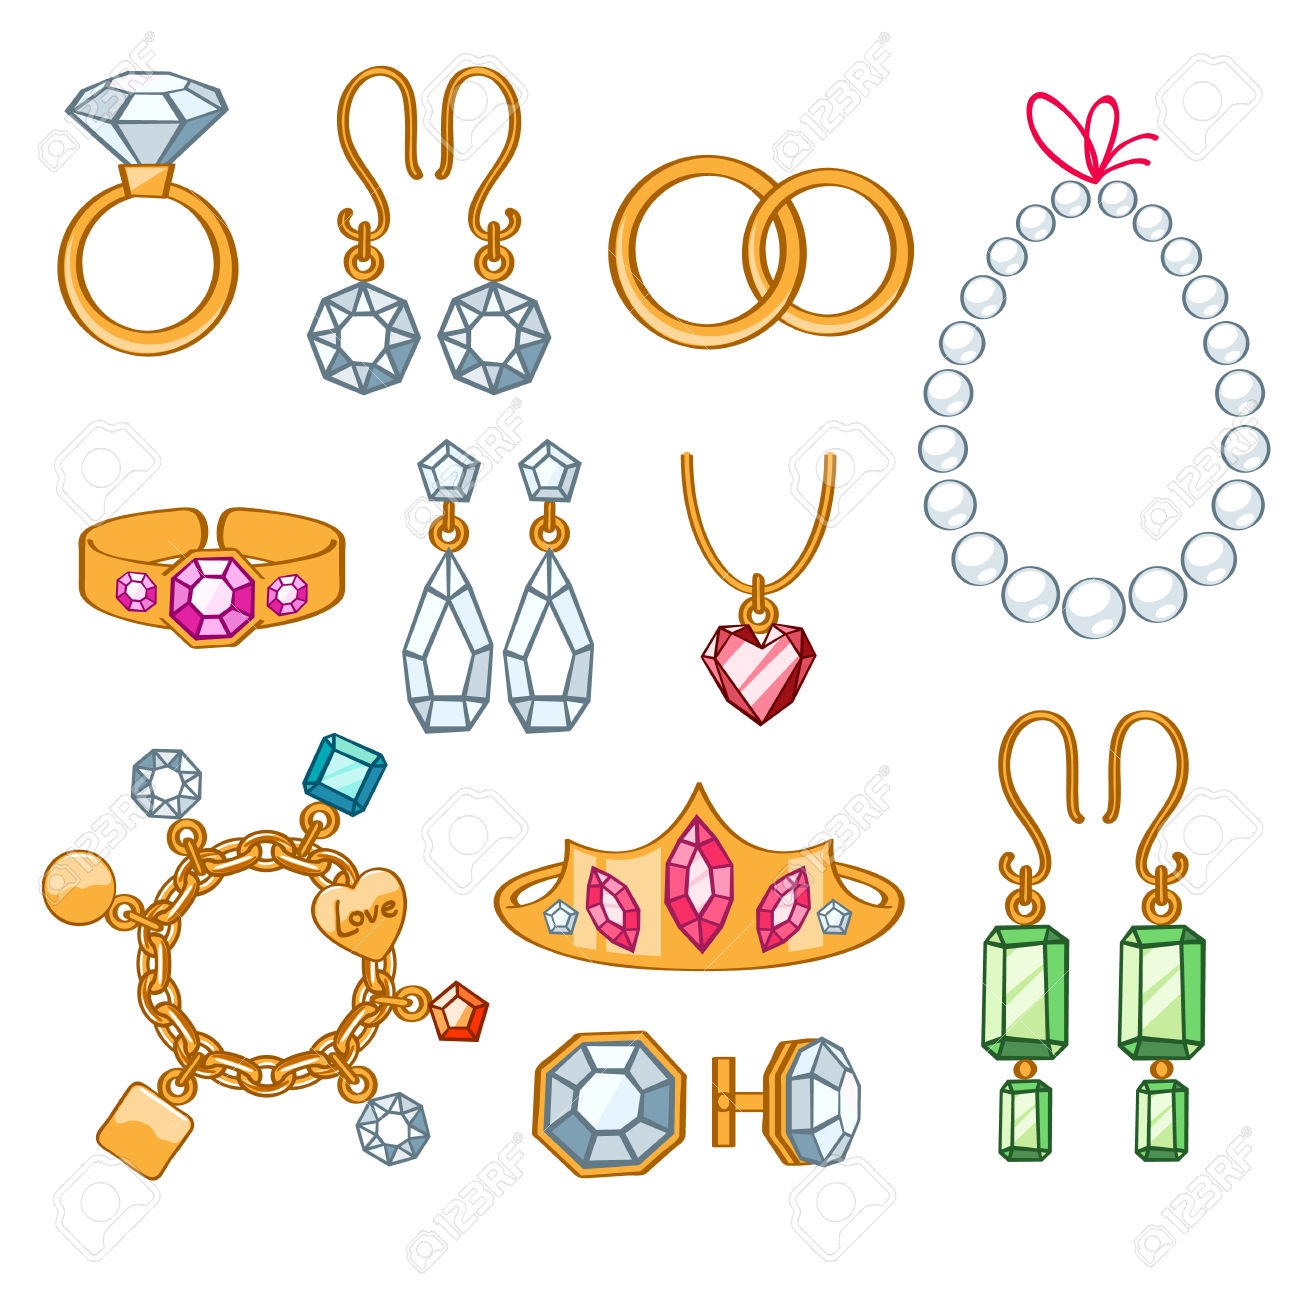 Cartoon clipart jewelry Cartoon jewelry Transparent FREE for download on WebStockReview 2021